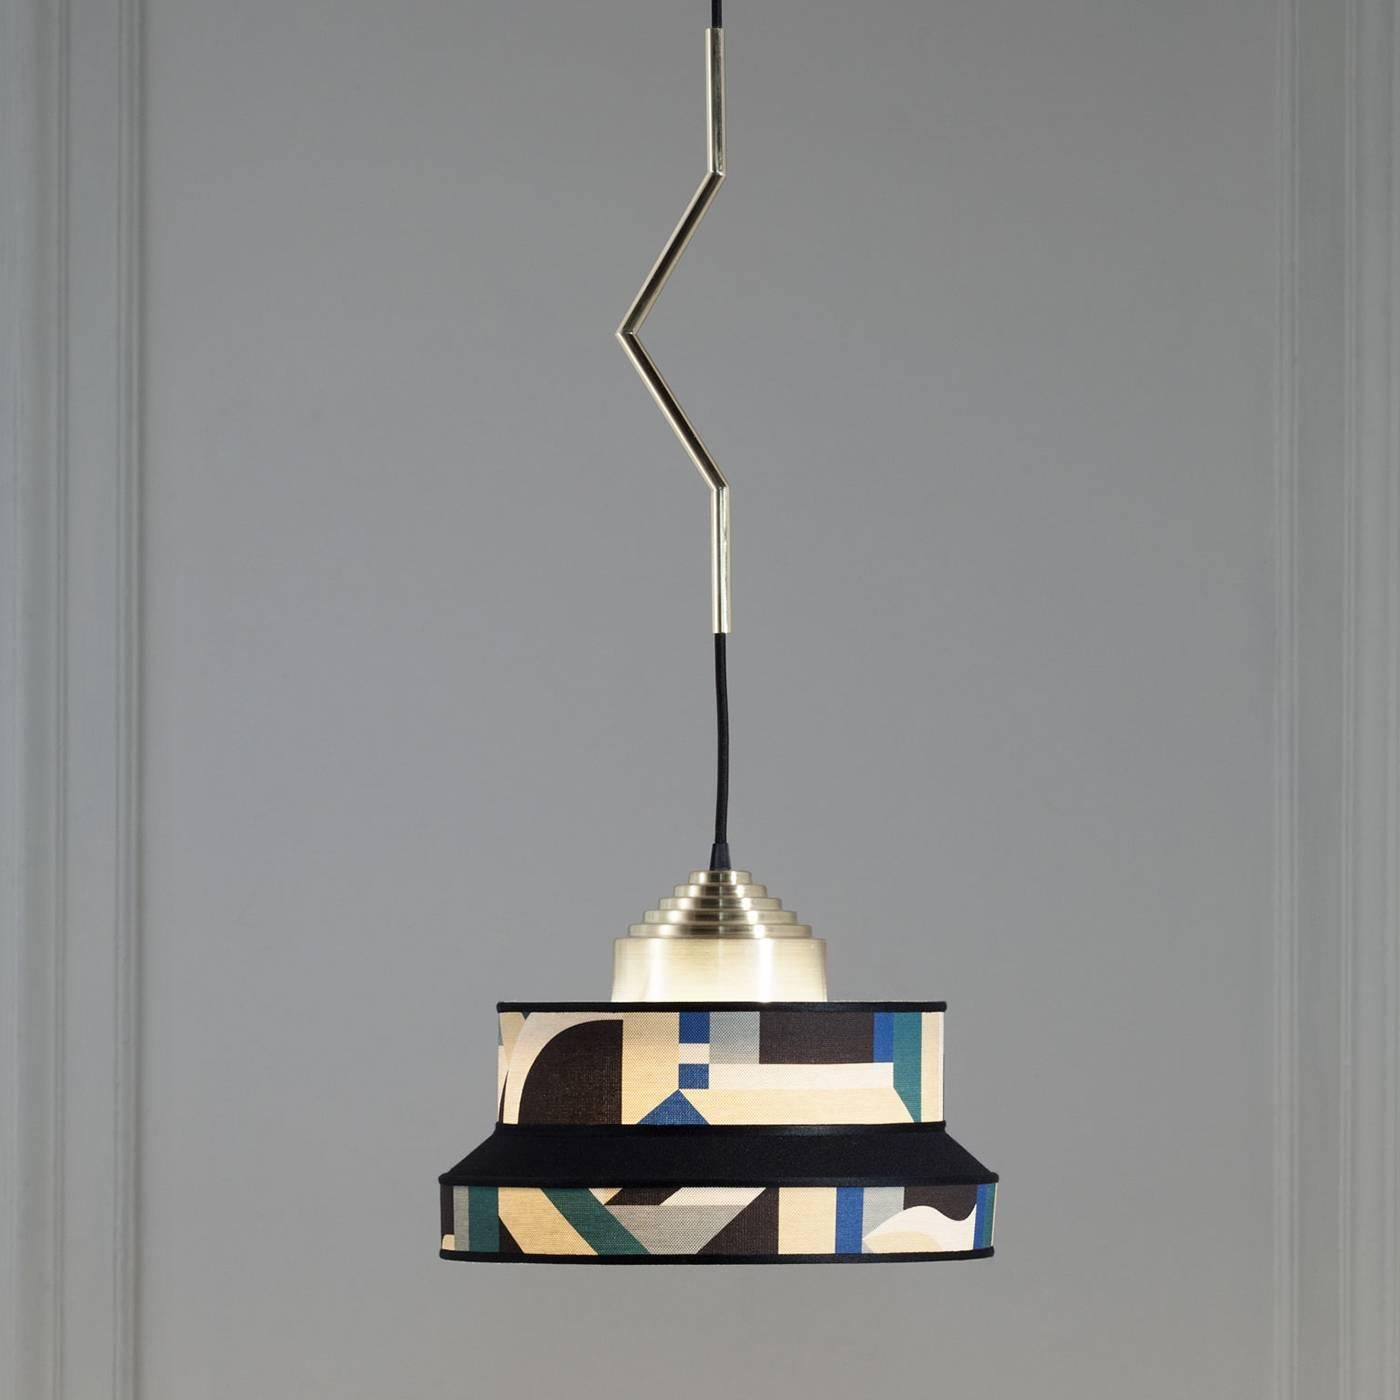 Inspired by the atmosphere of the Italian cafe in the 1930s, the tiered circular shade of this exclusive pendant lamp features a geometric print that evokes Depero's futuristic canvas painted with color nuances and geometric shapes (Perspective